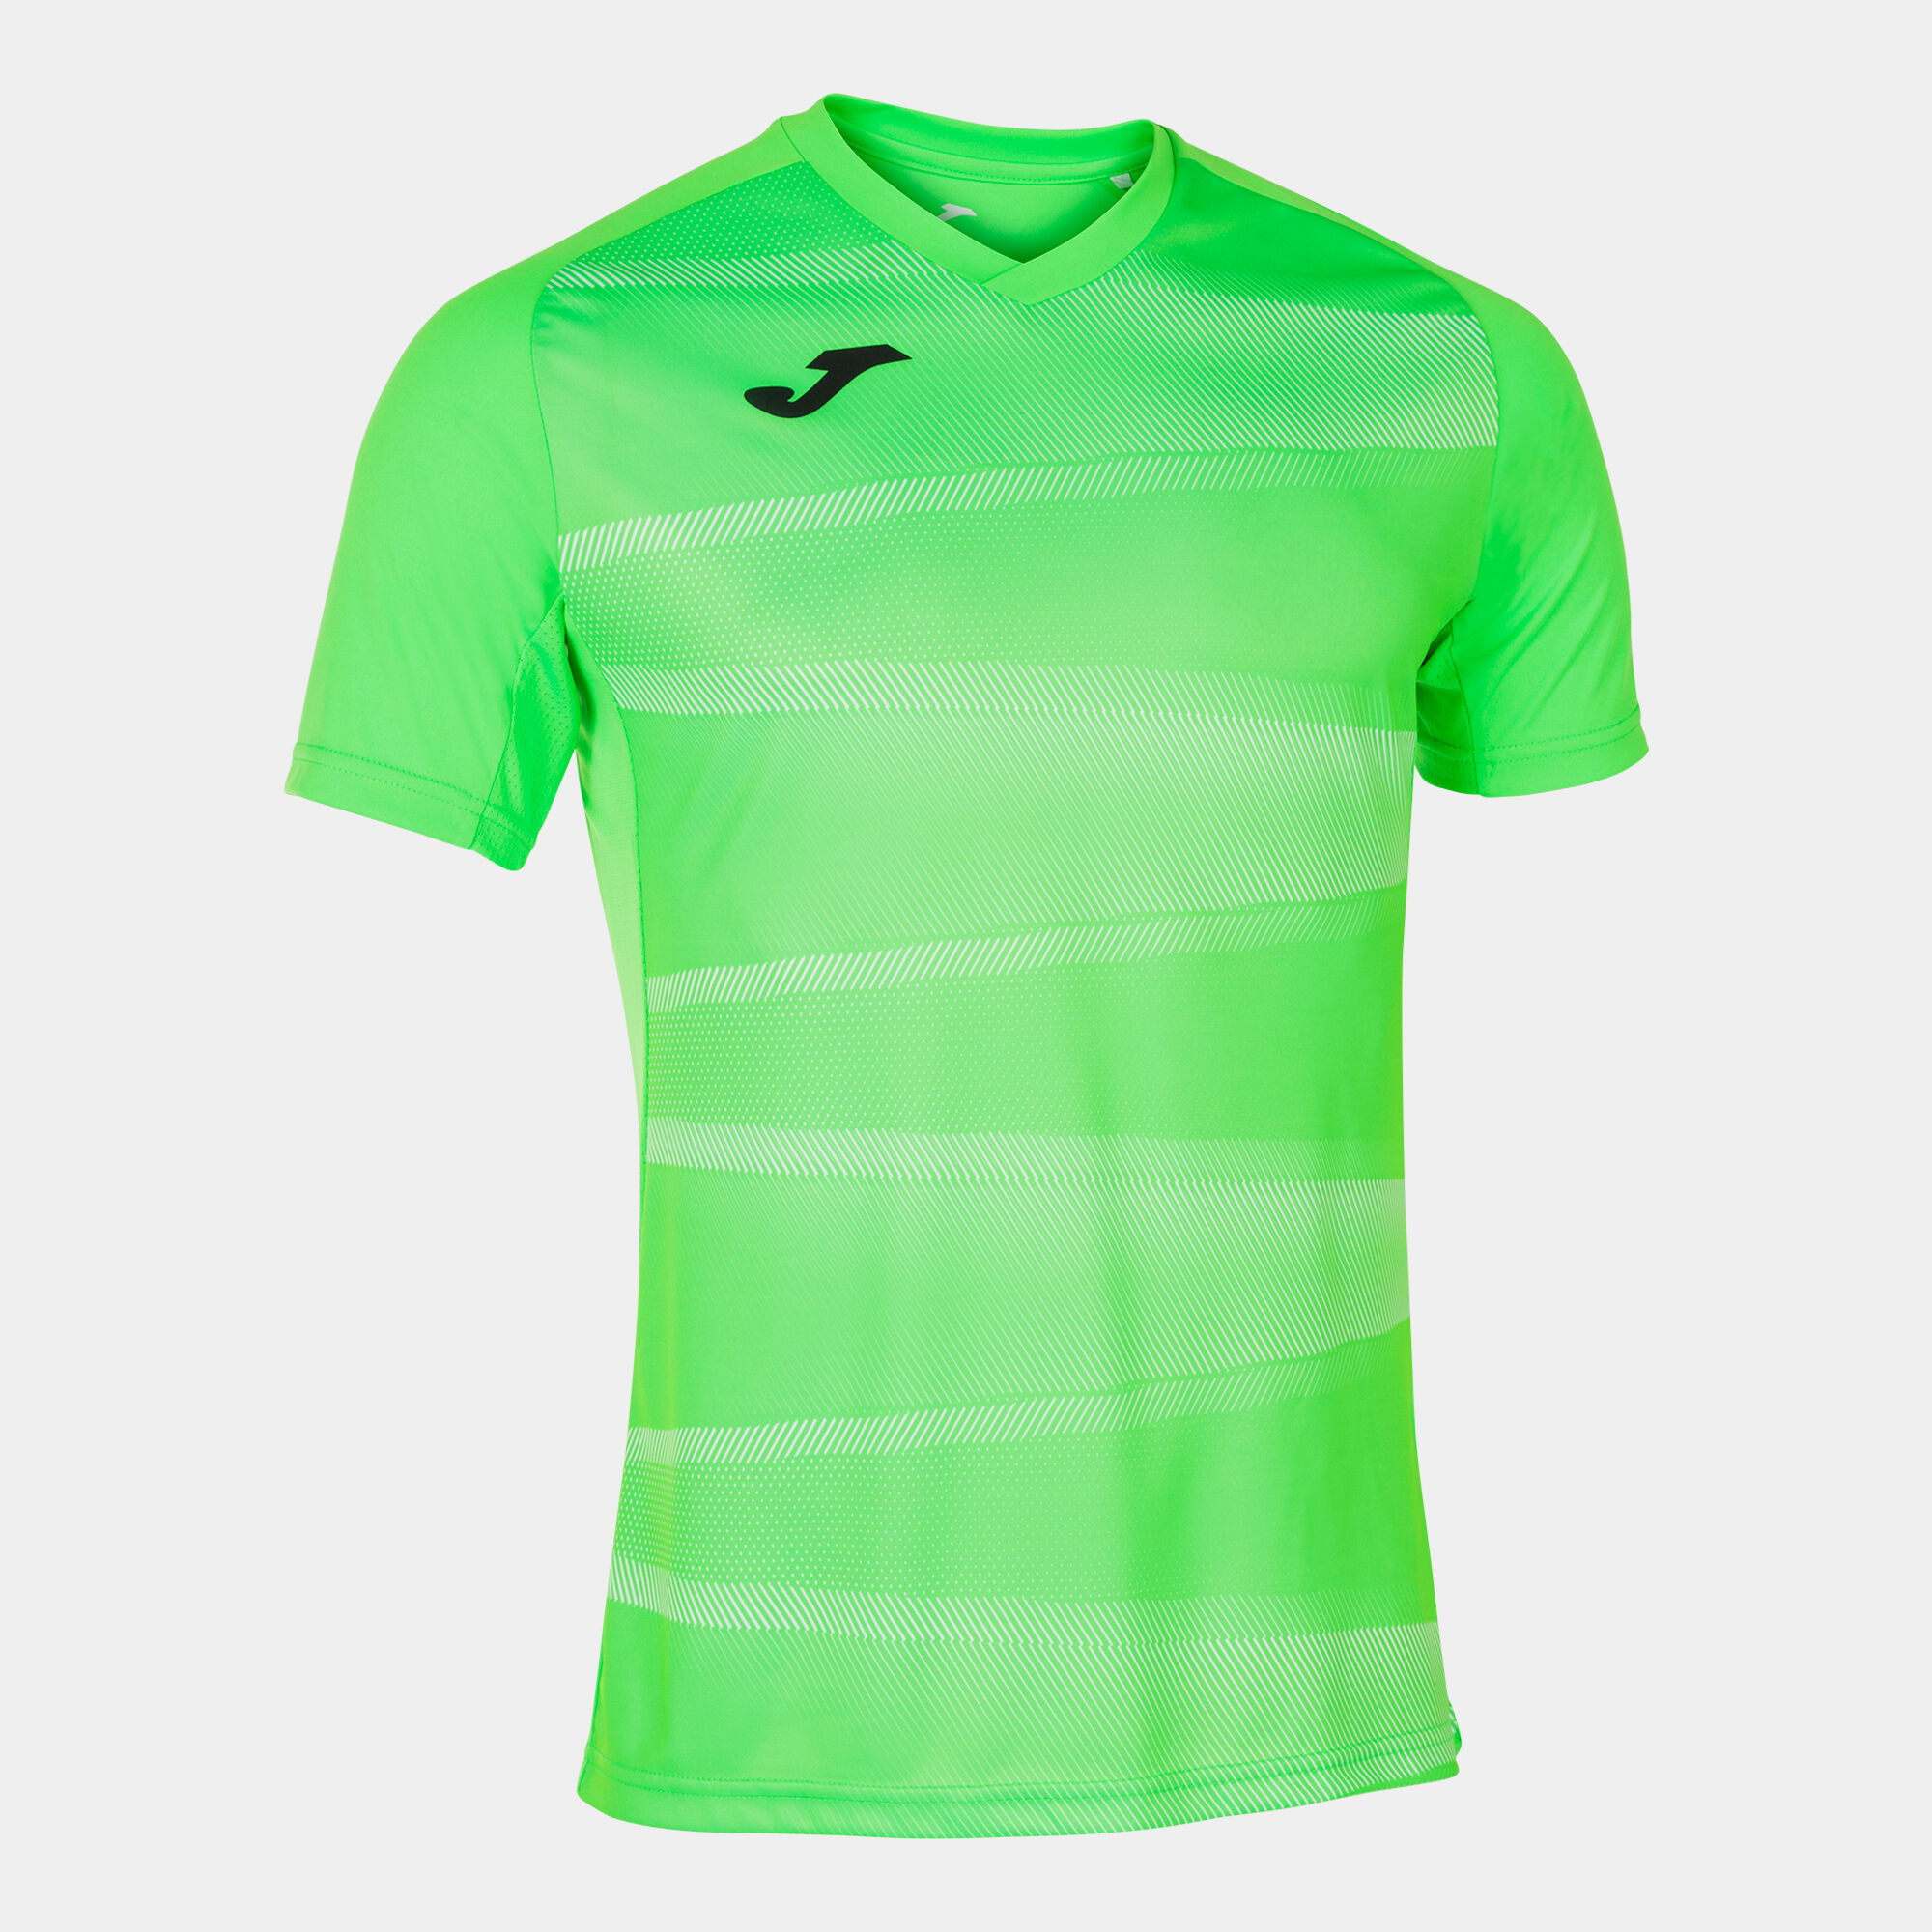 MAILLOT MANCHES COURTES HOMME GRAFITY II VERT FLUO